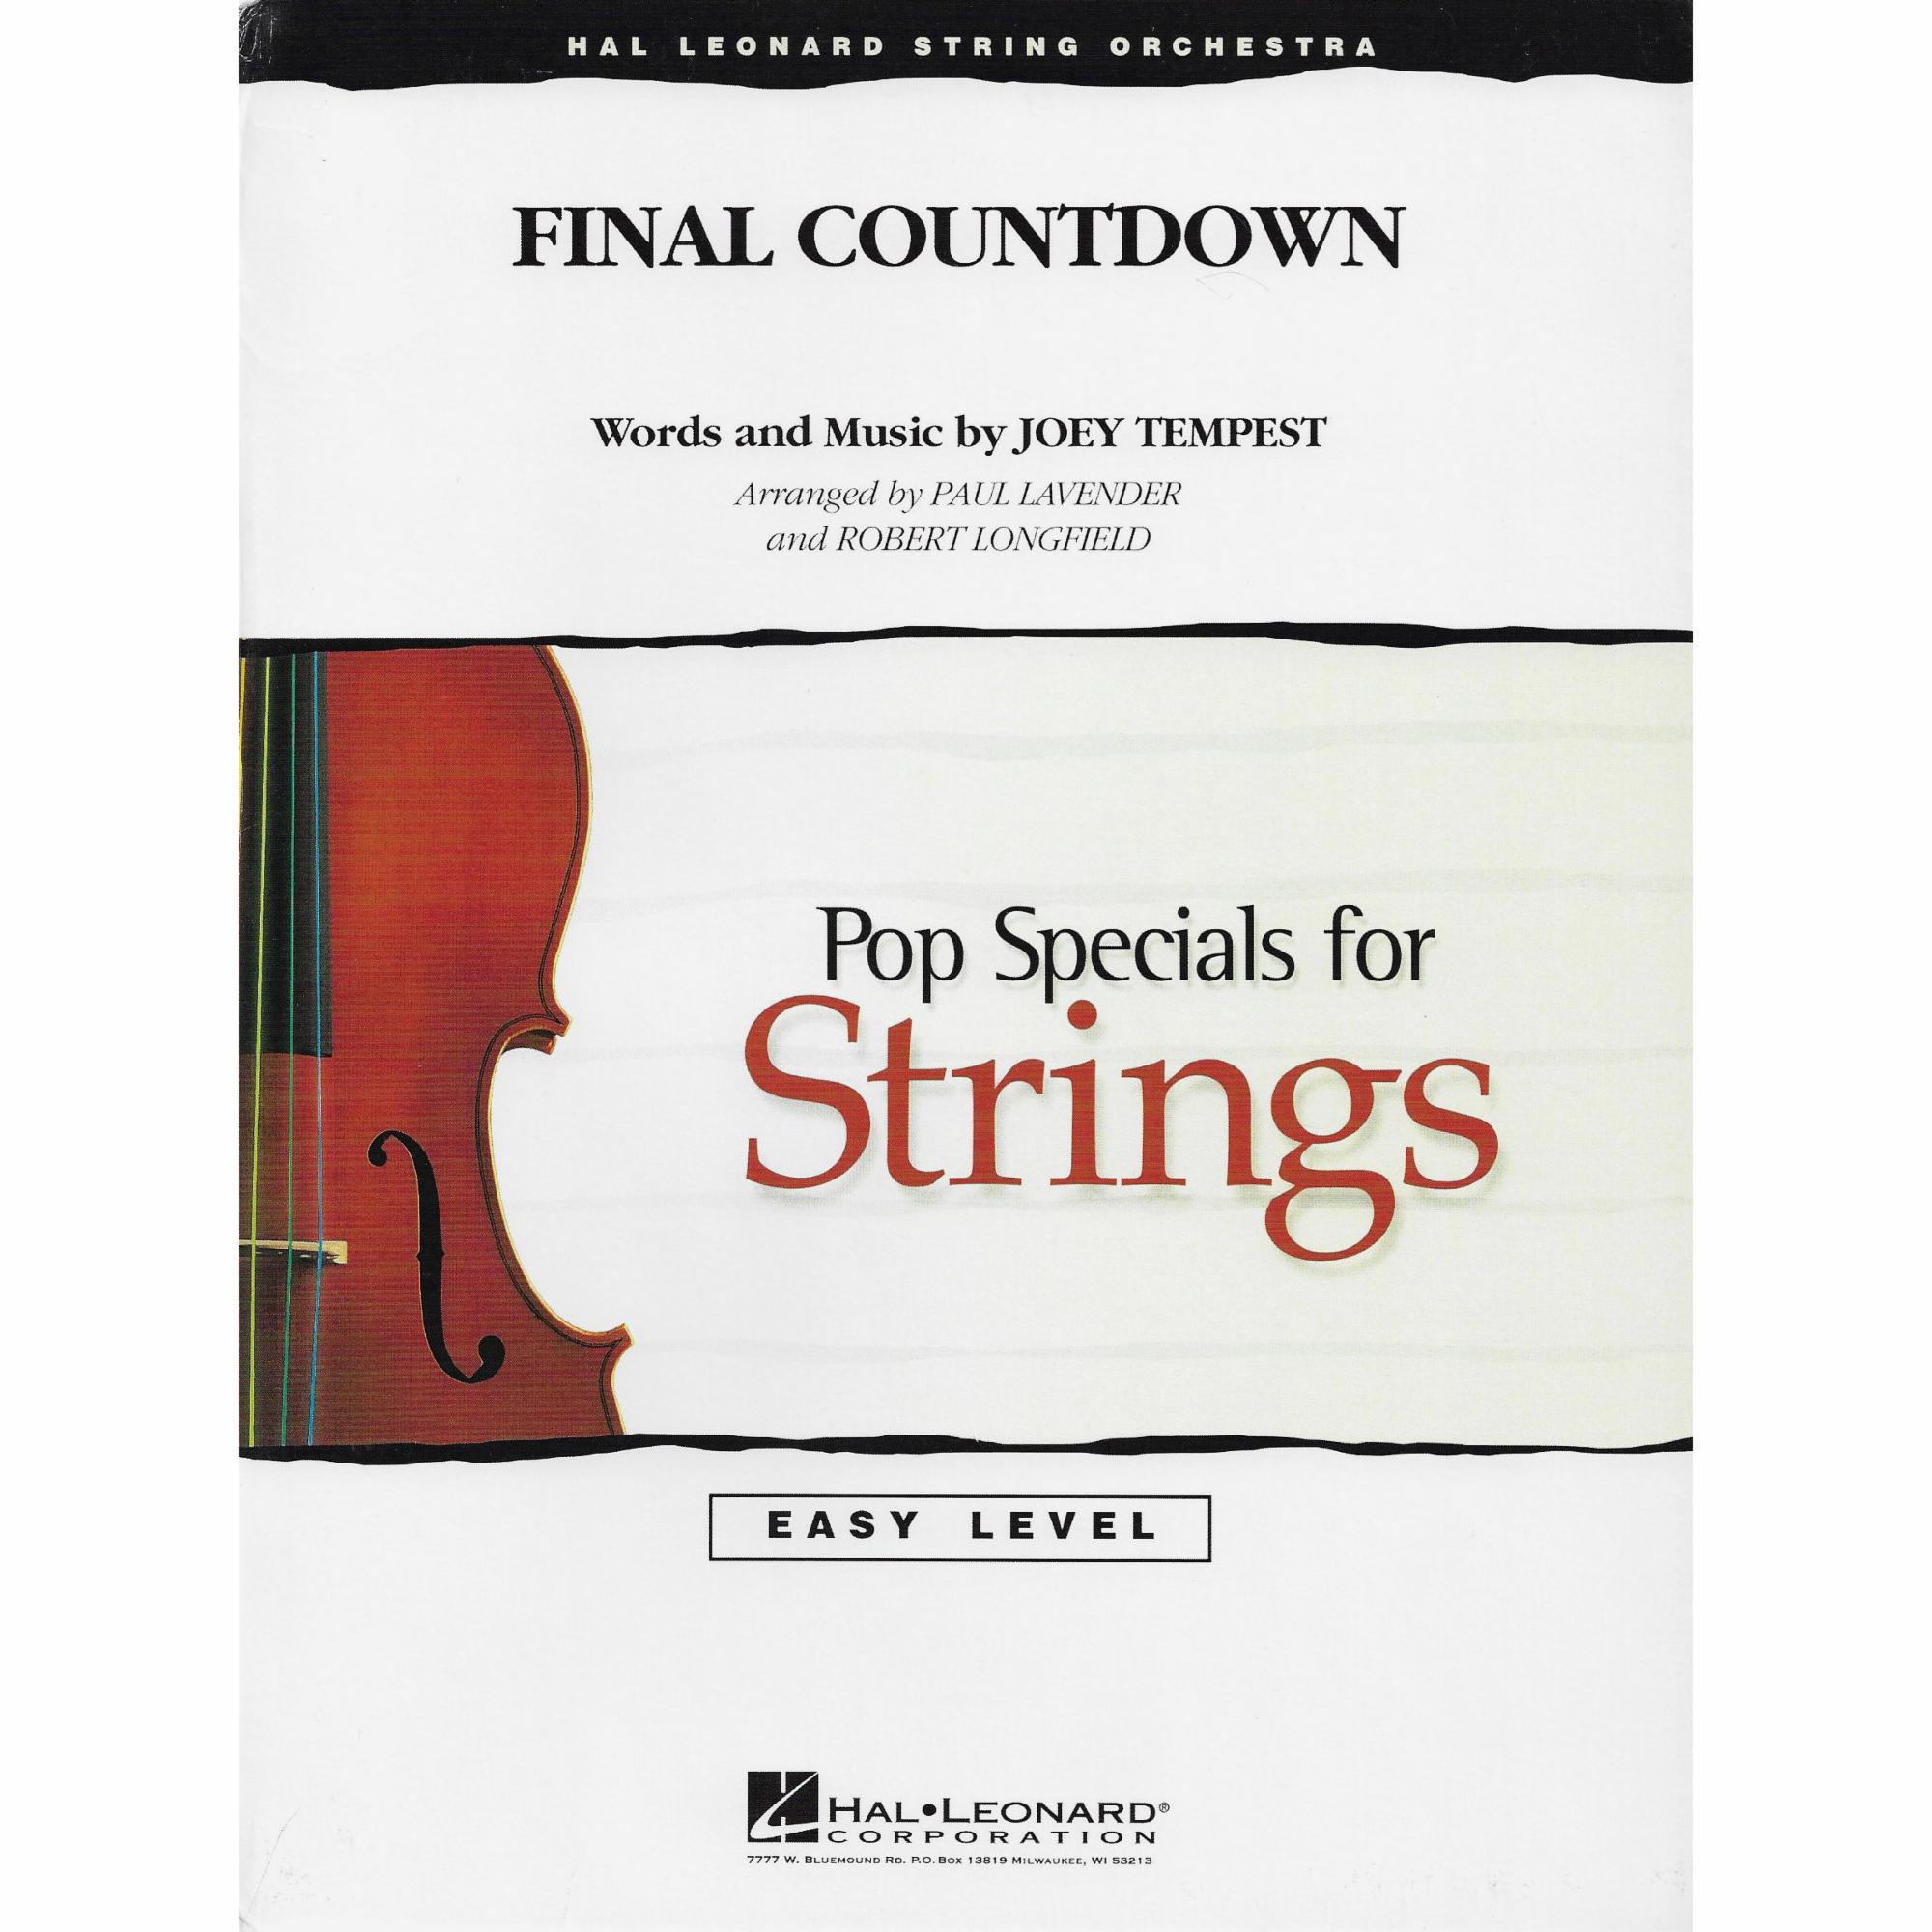 Final Countdown for String Orchestra